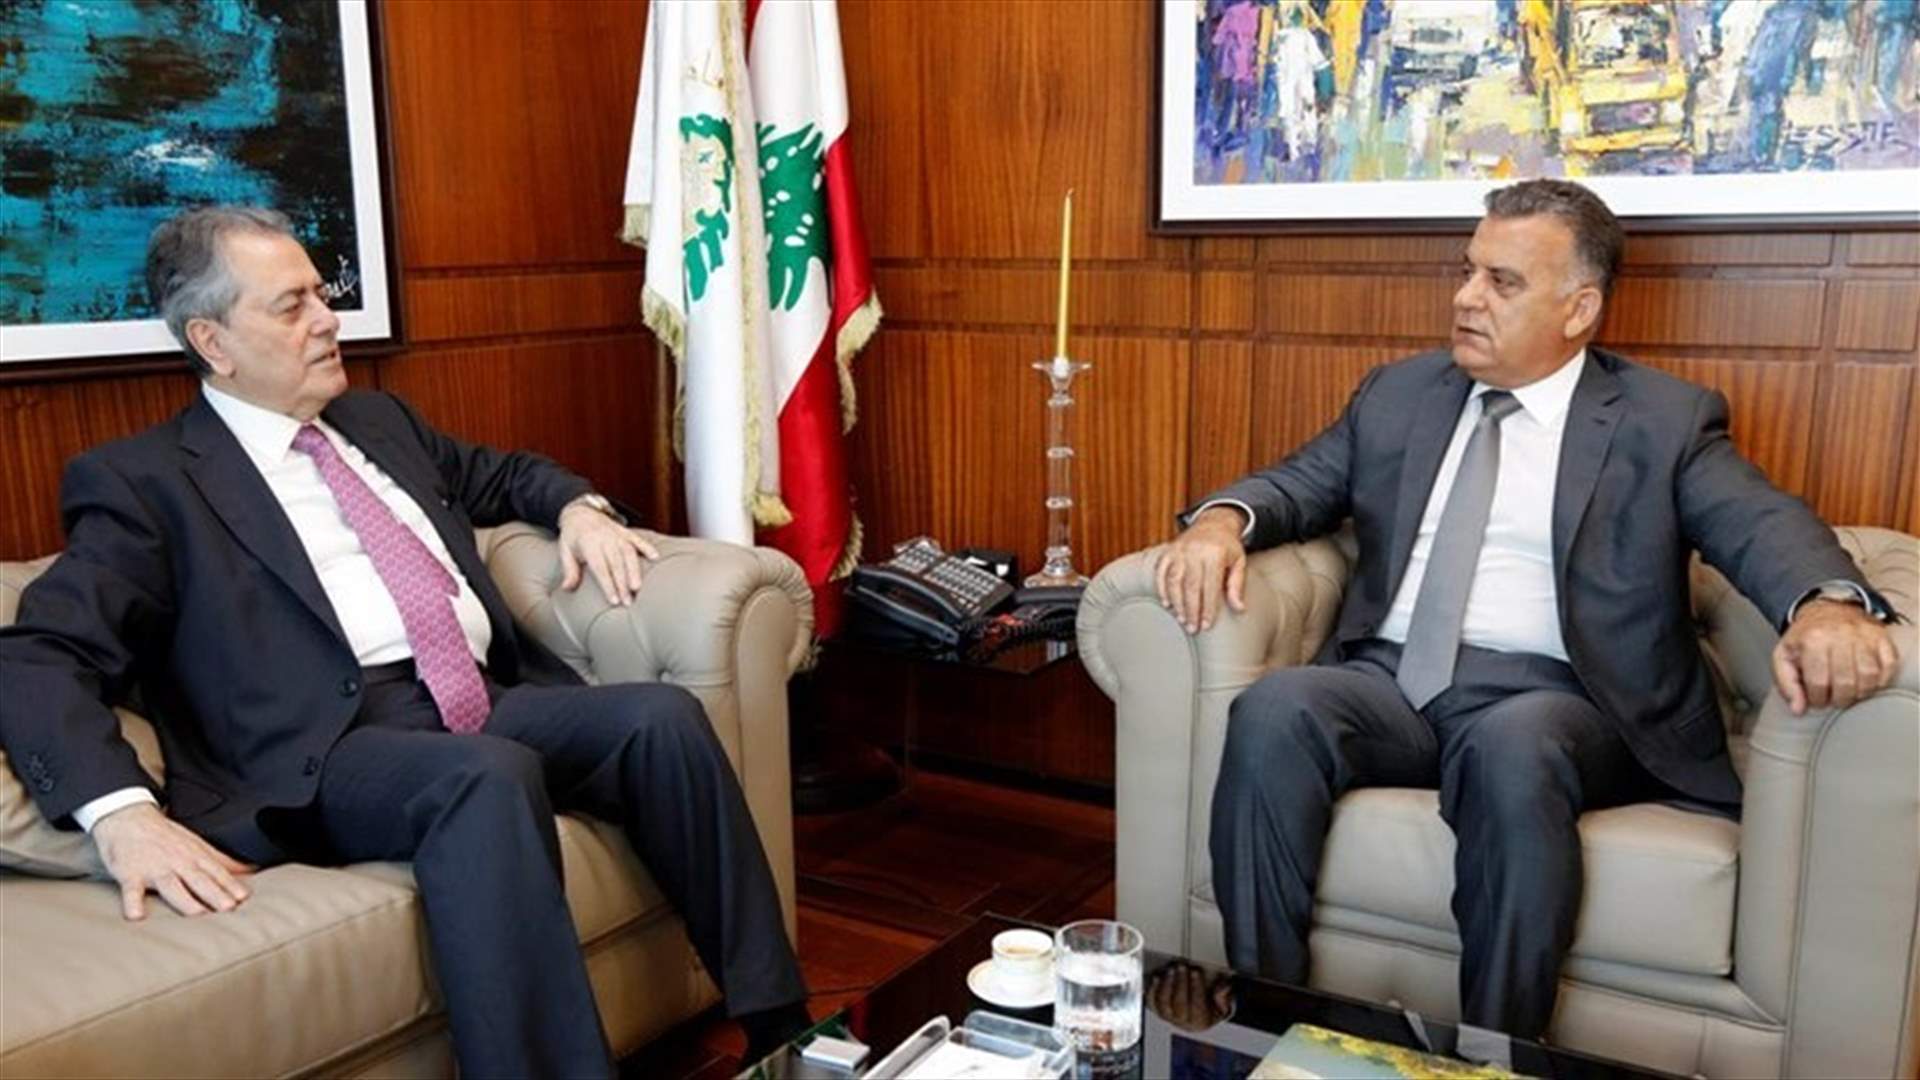 Maj. Gen. Ibrahim discusses Syrian refugees’ situation with Syrian ambassador